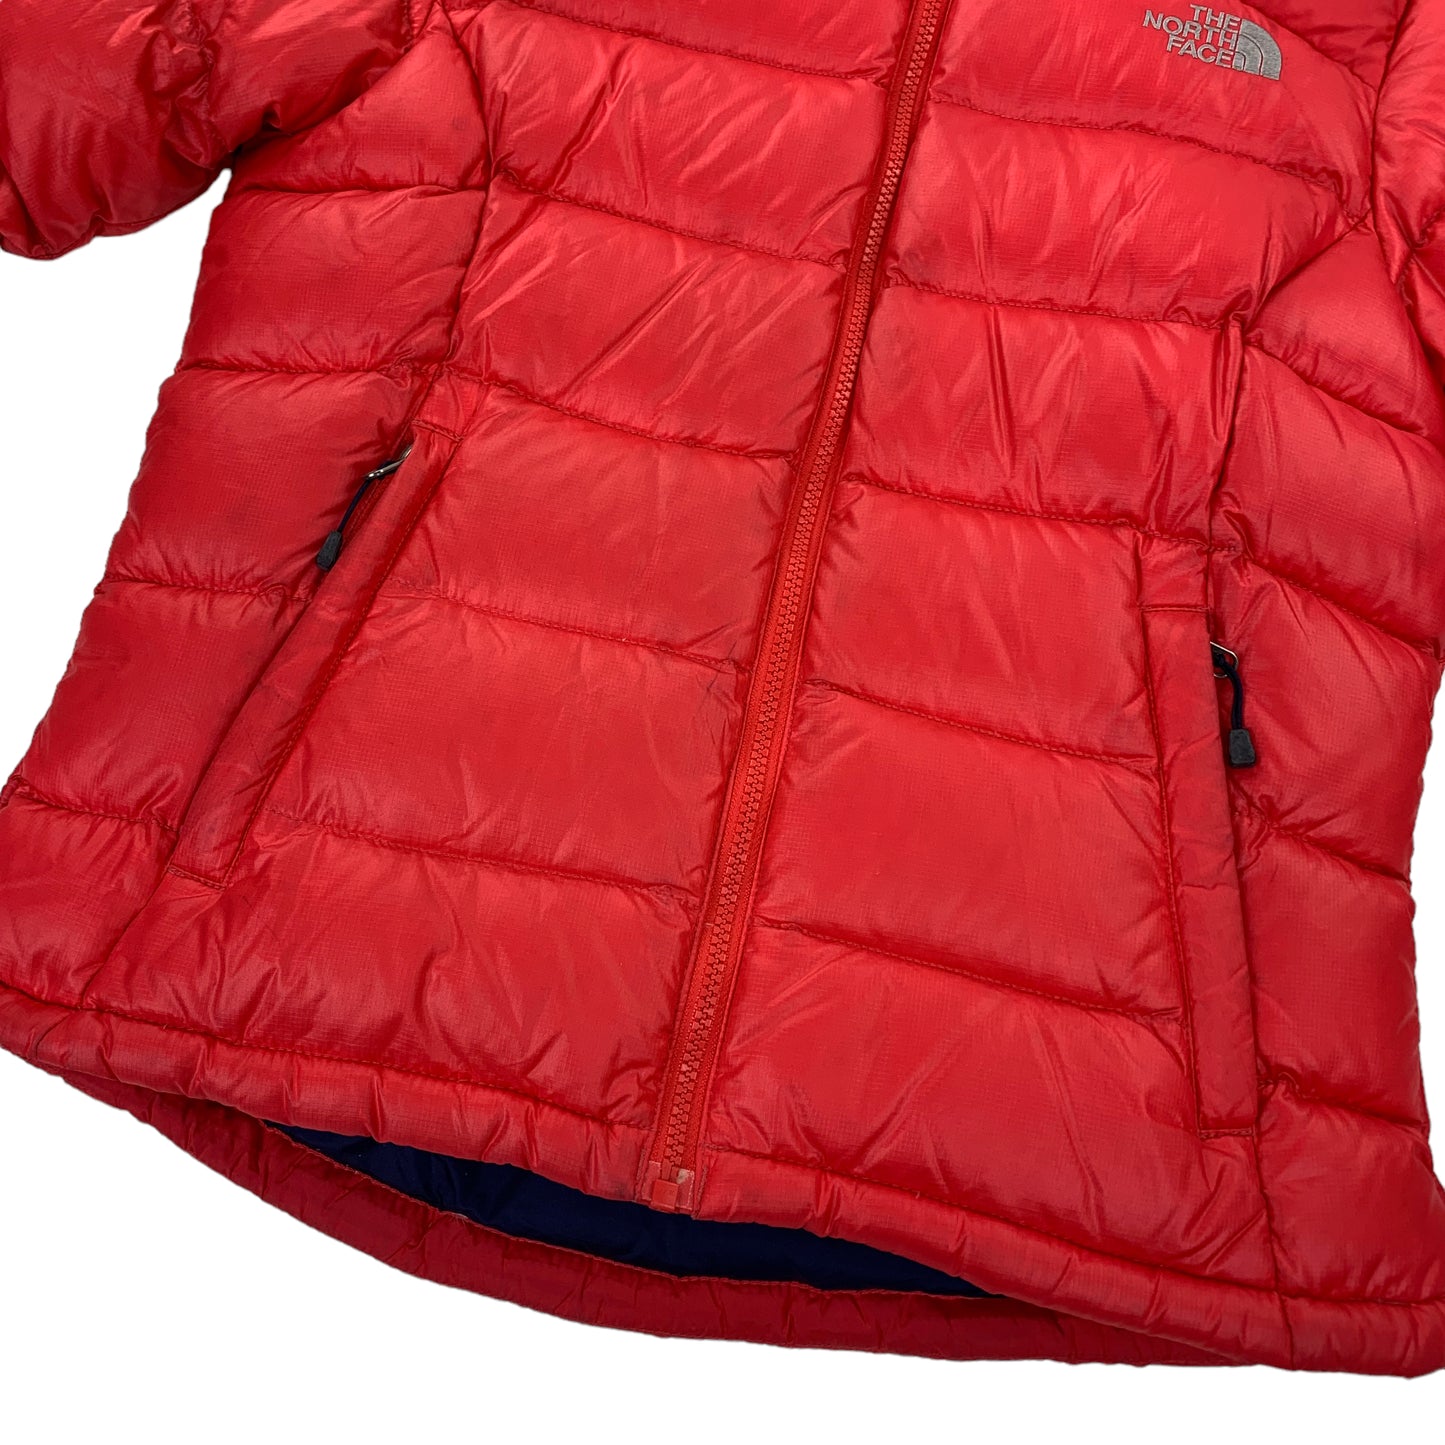 The North Face 700 Puffer